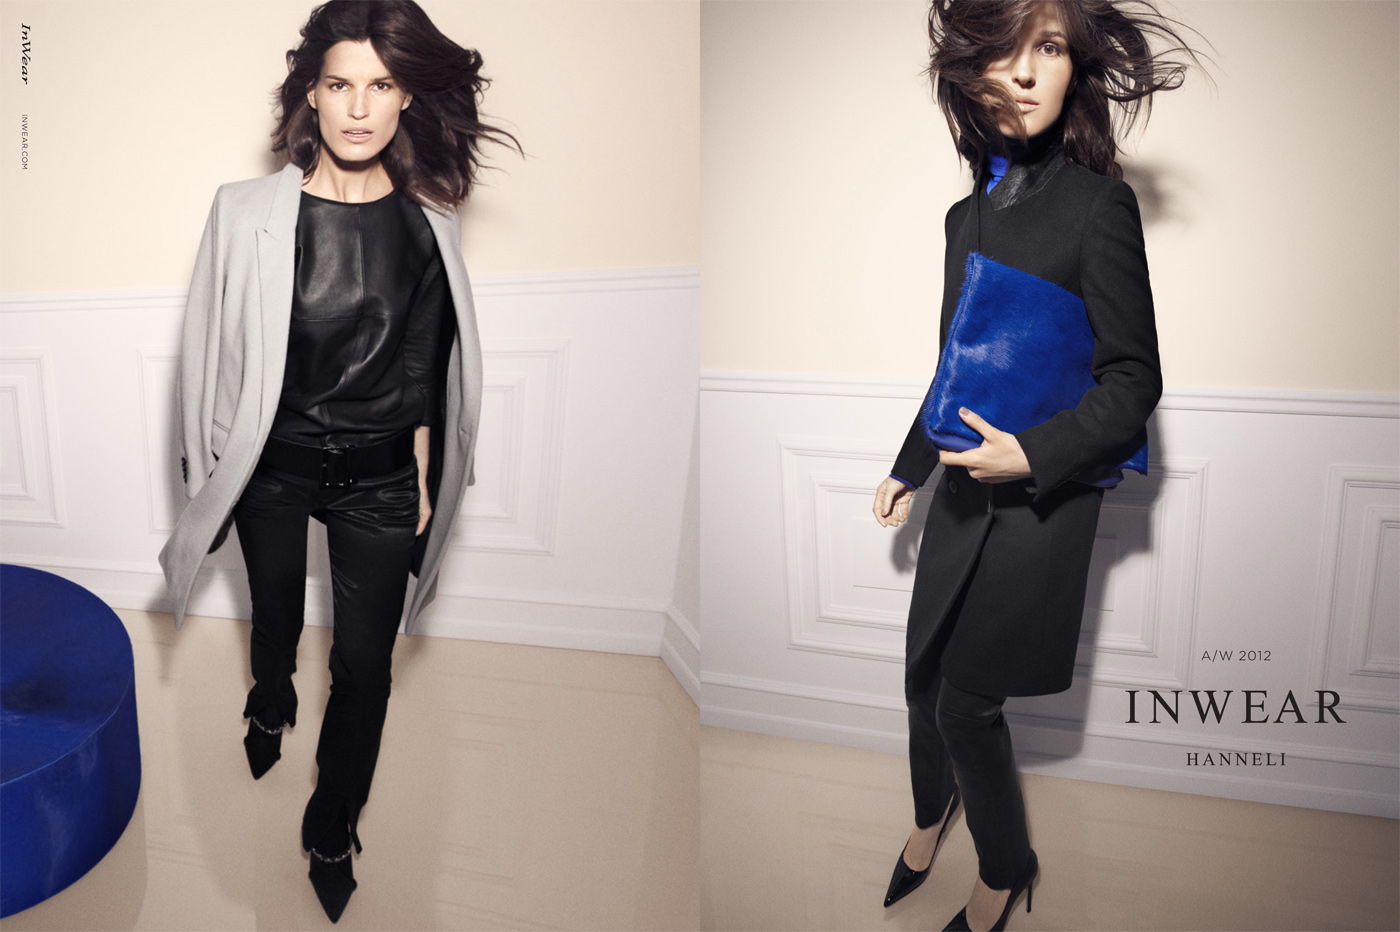 Inwear – Campaign collateral Autumn/Winter 2012